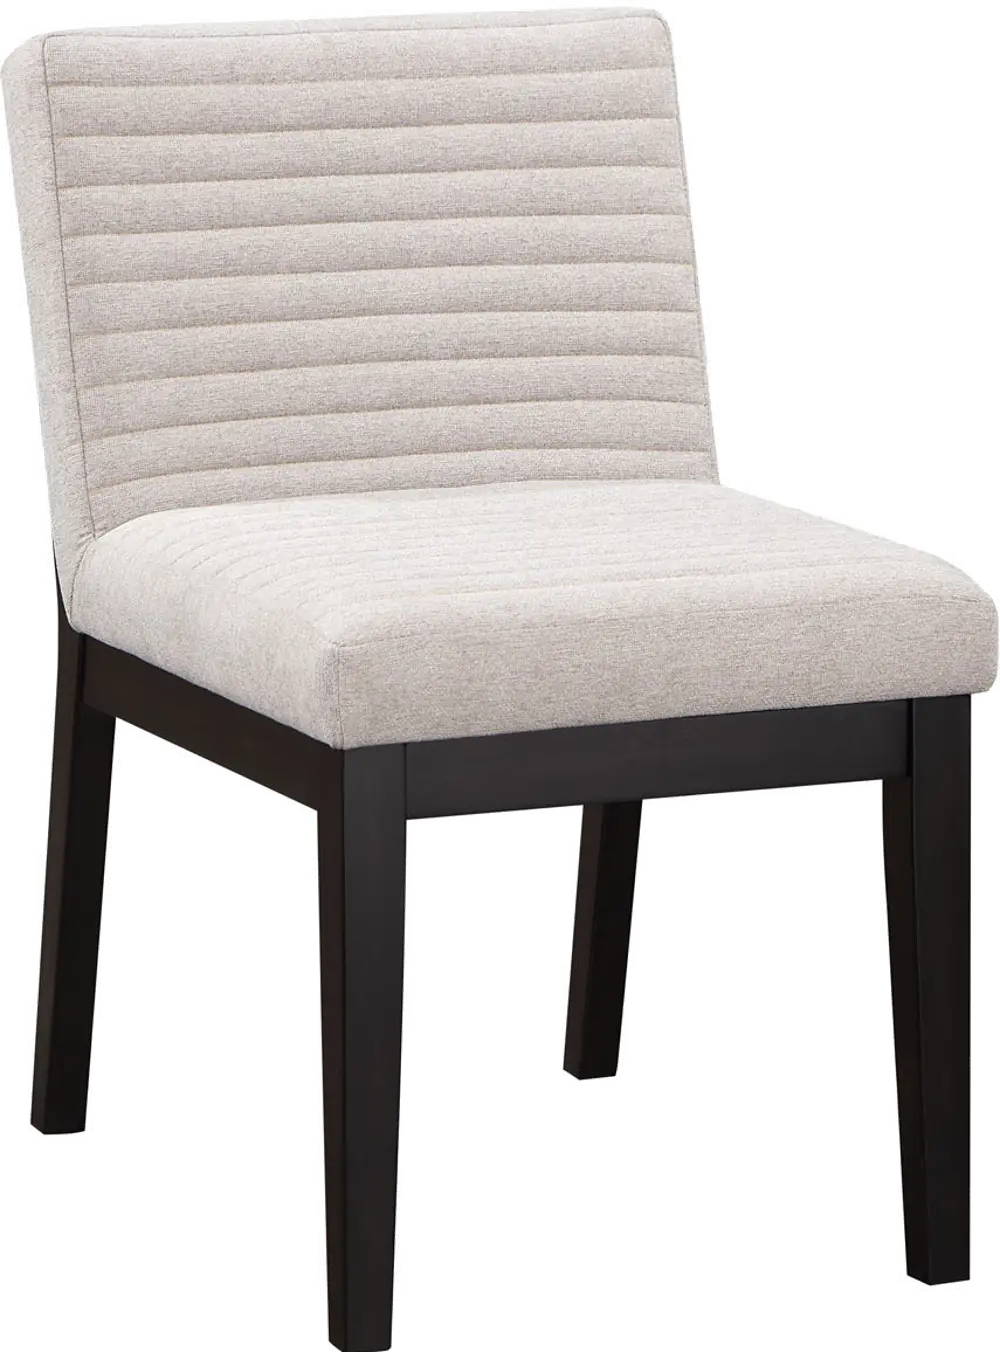 Jax Dark Brown and Light Gray Upholstered Dining Chair-1